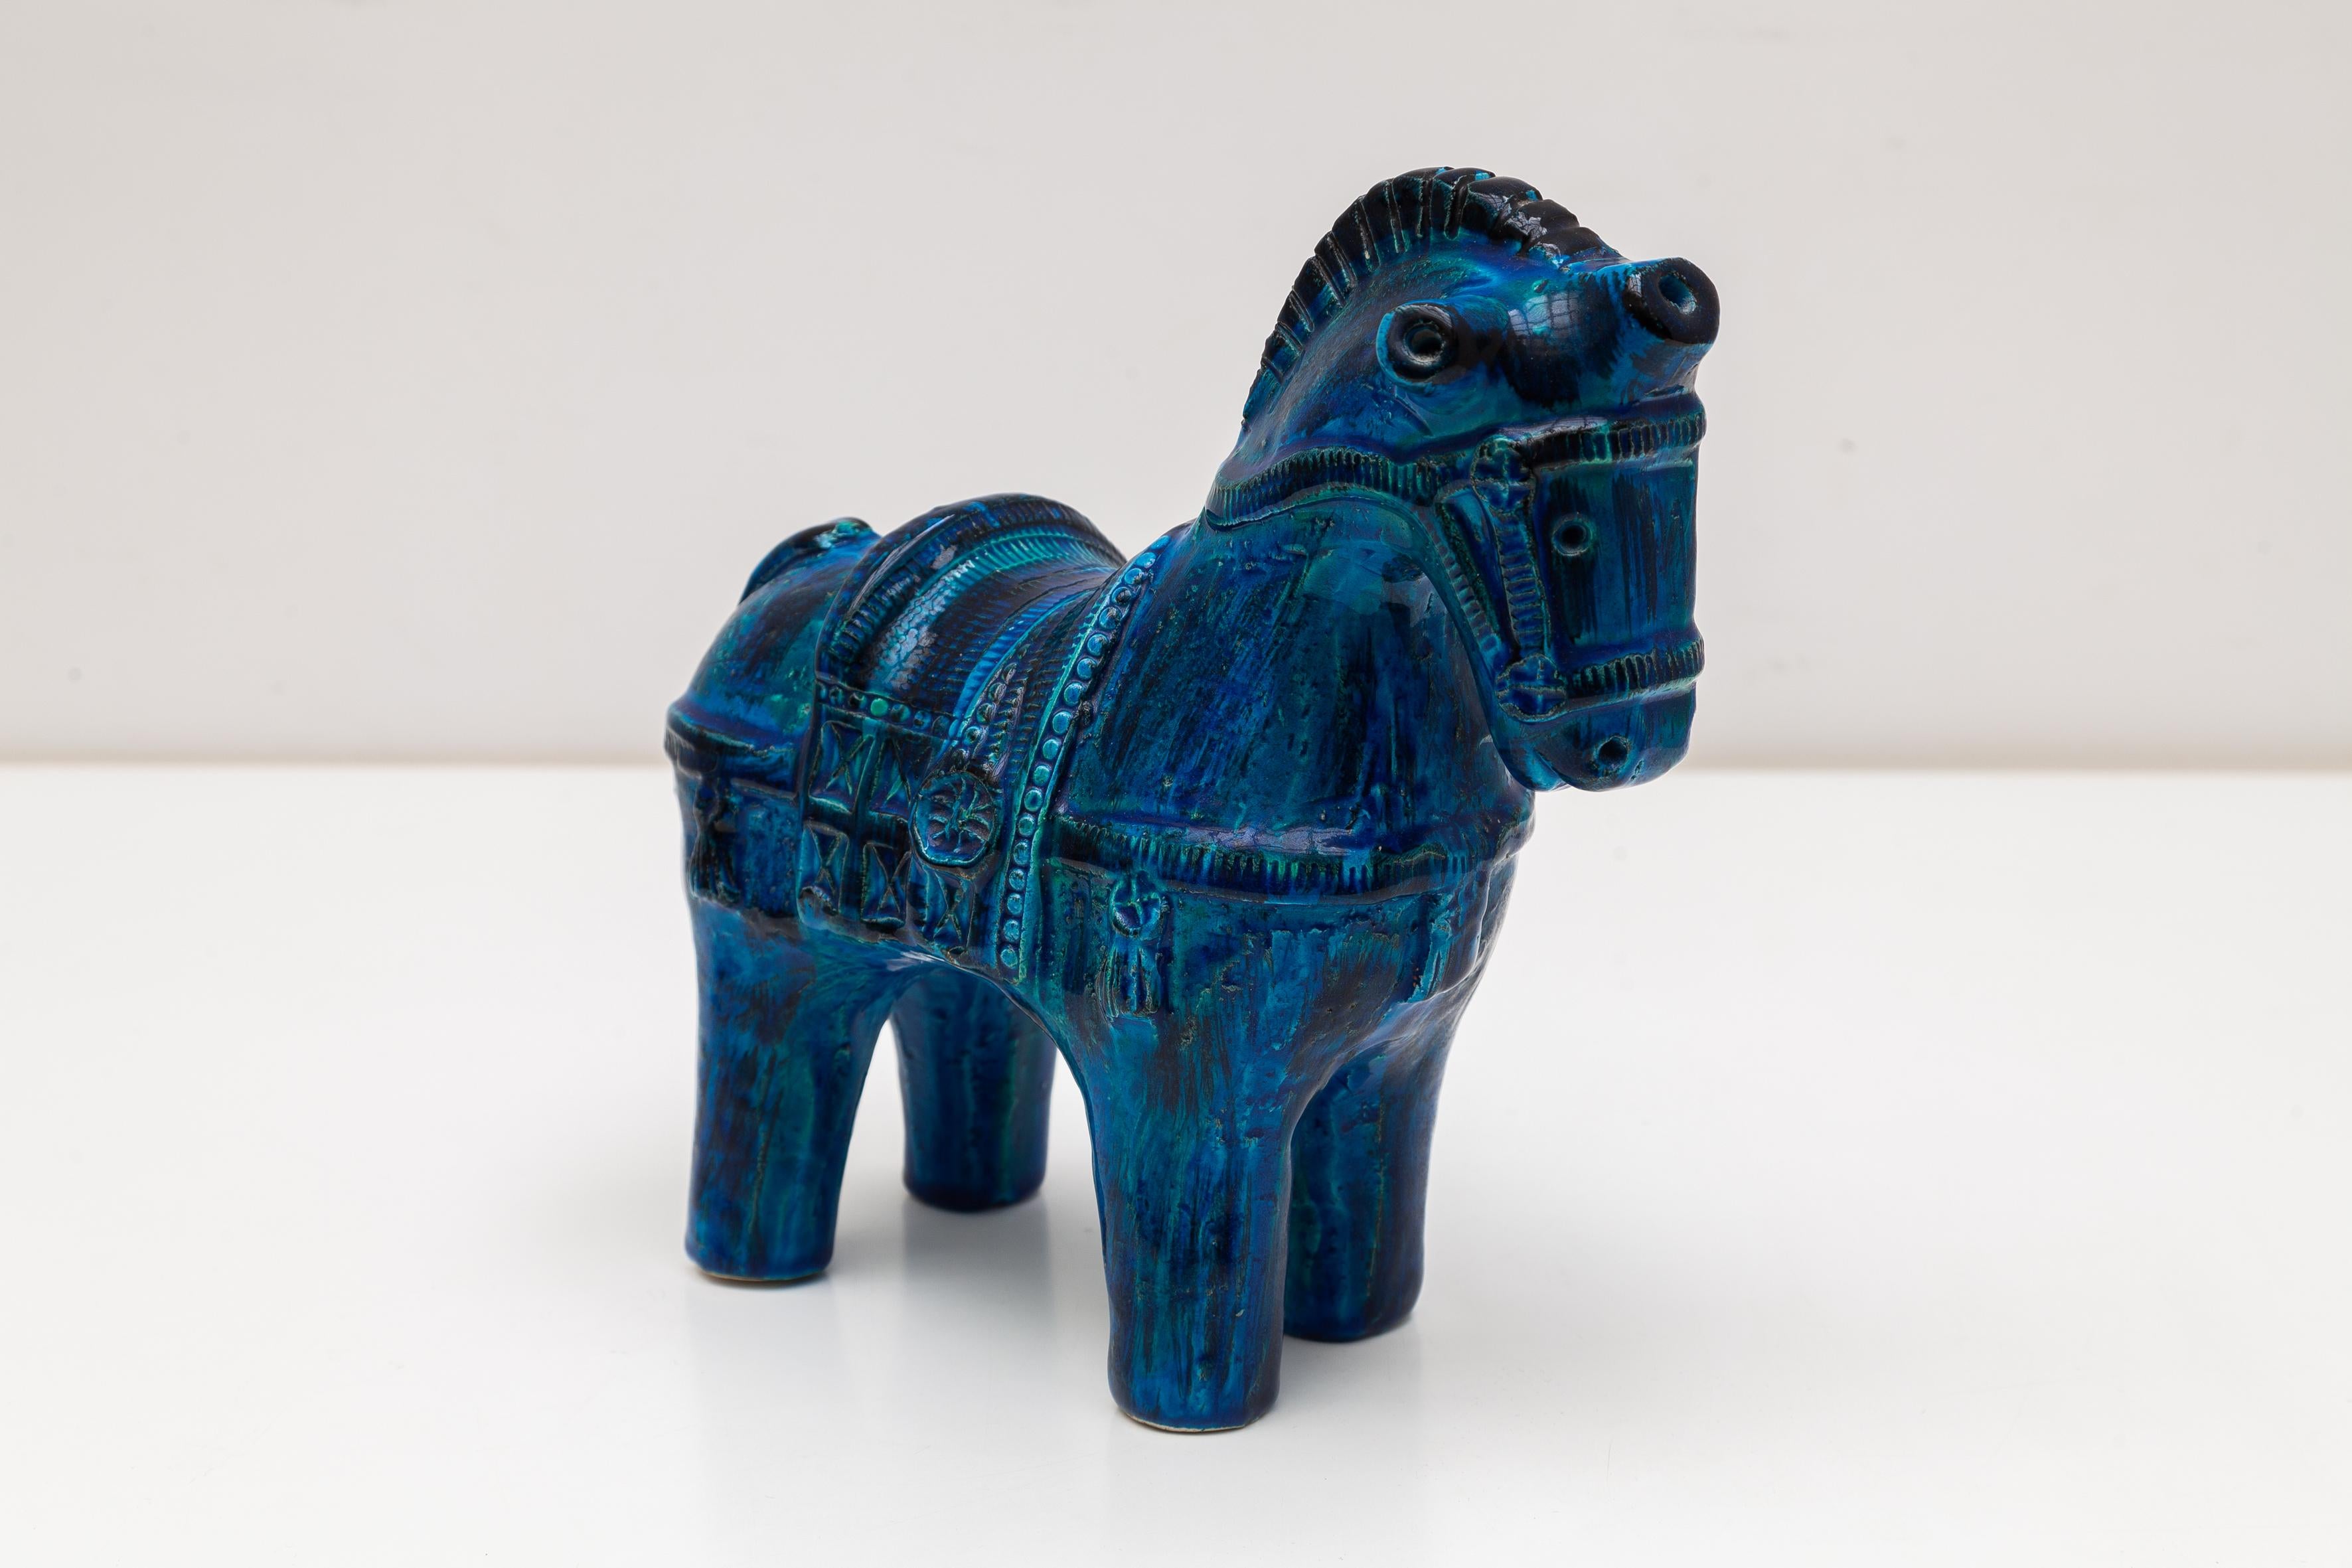 Blue ceramic statue of a horse with bridle and saddle from Aldo Londi. Bright blue-green glaze 